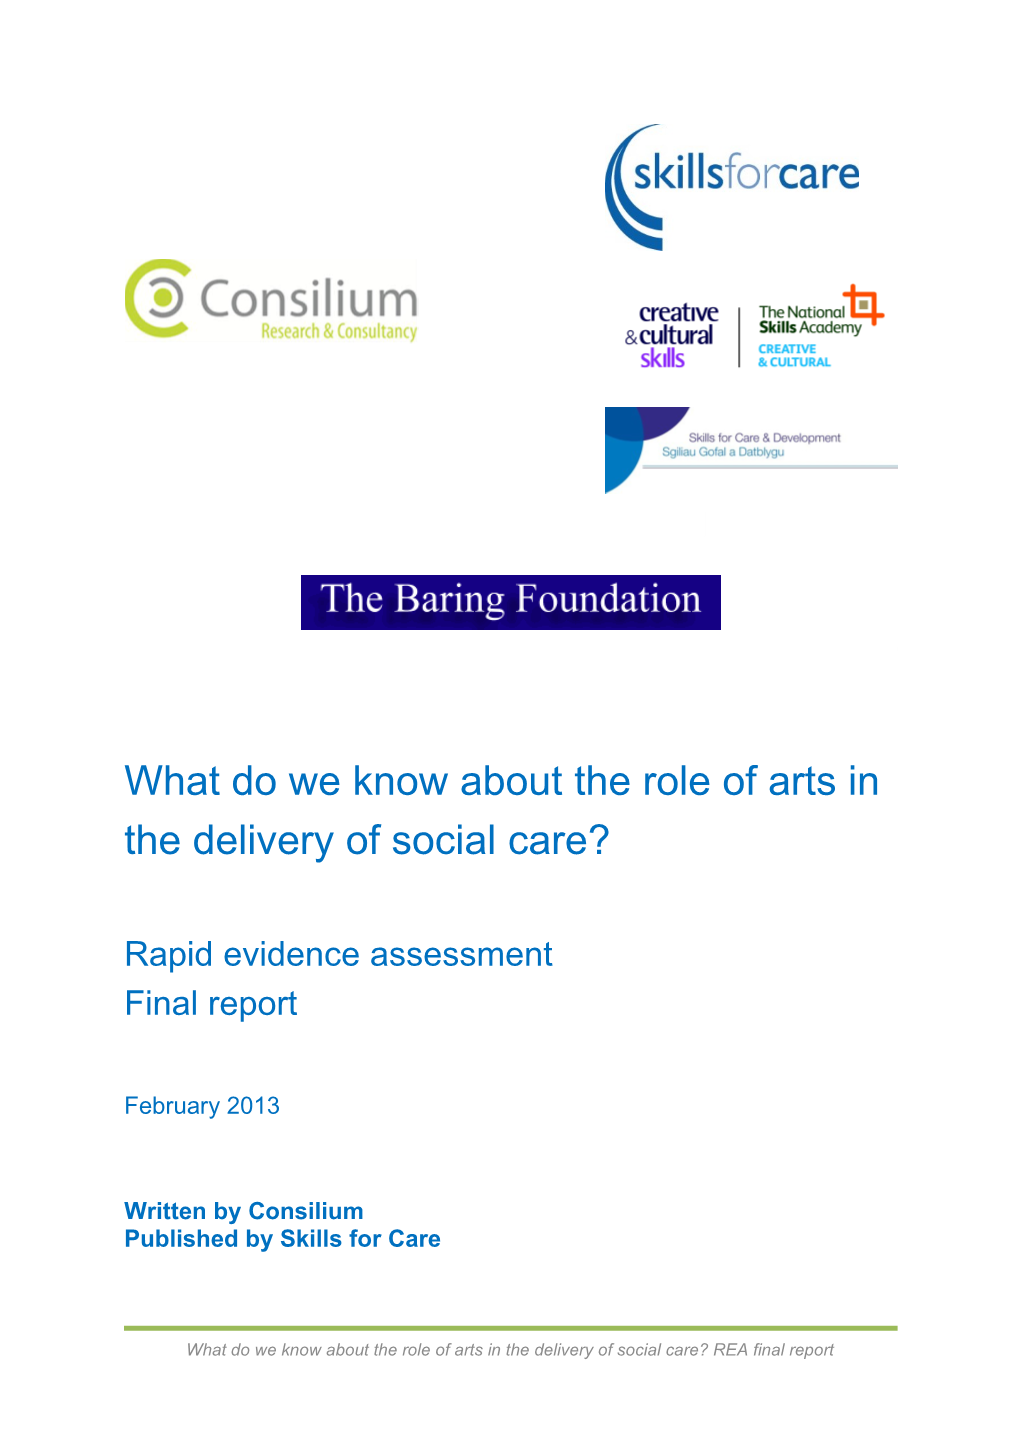 What Do We Know About the Role of Arts in the Delivery of Social Care?